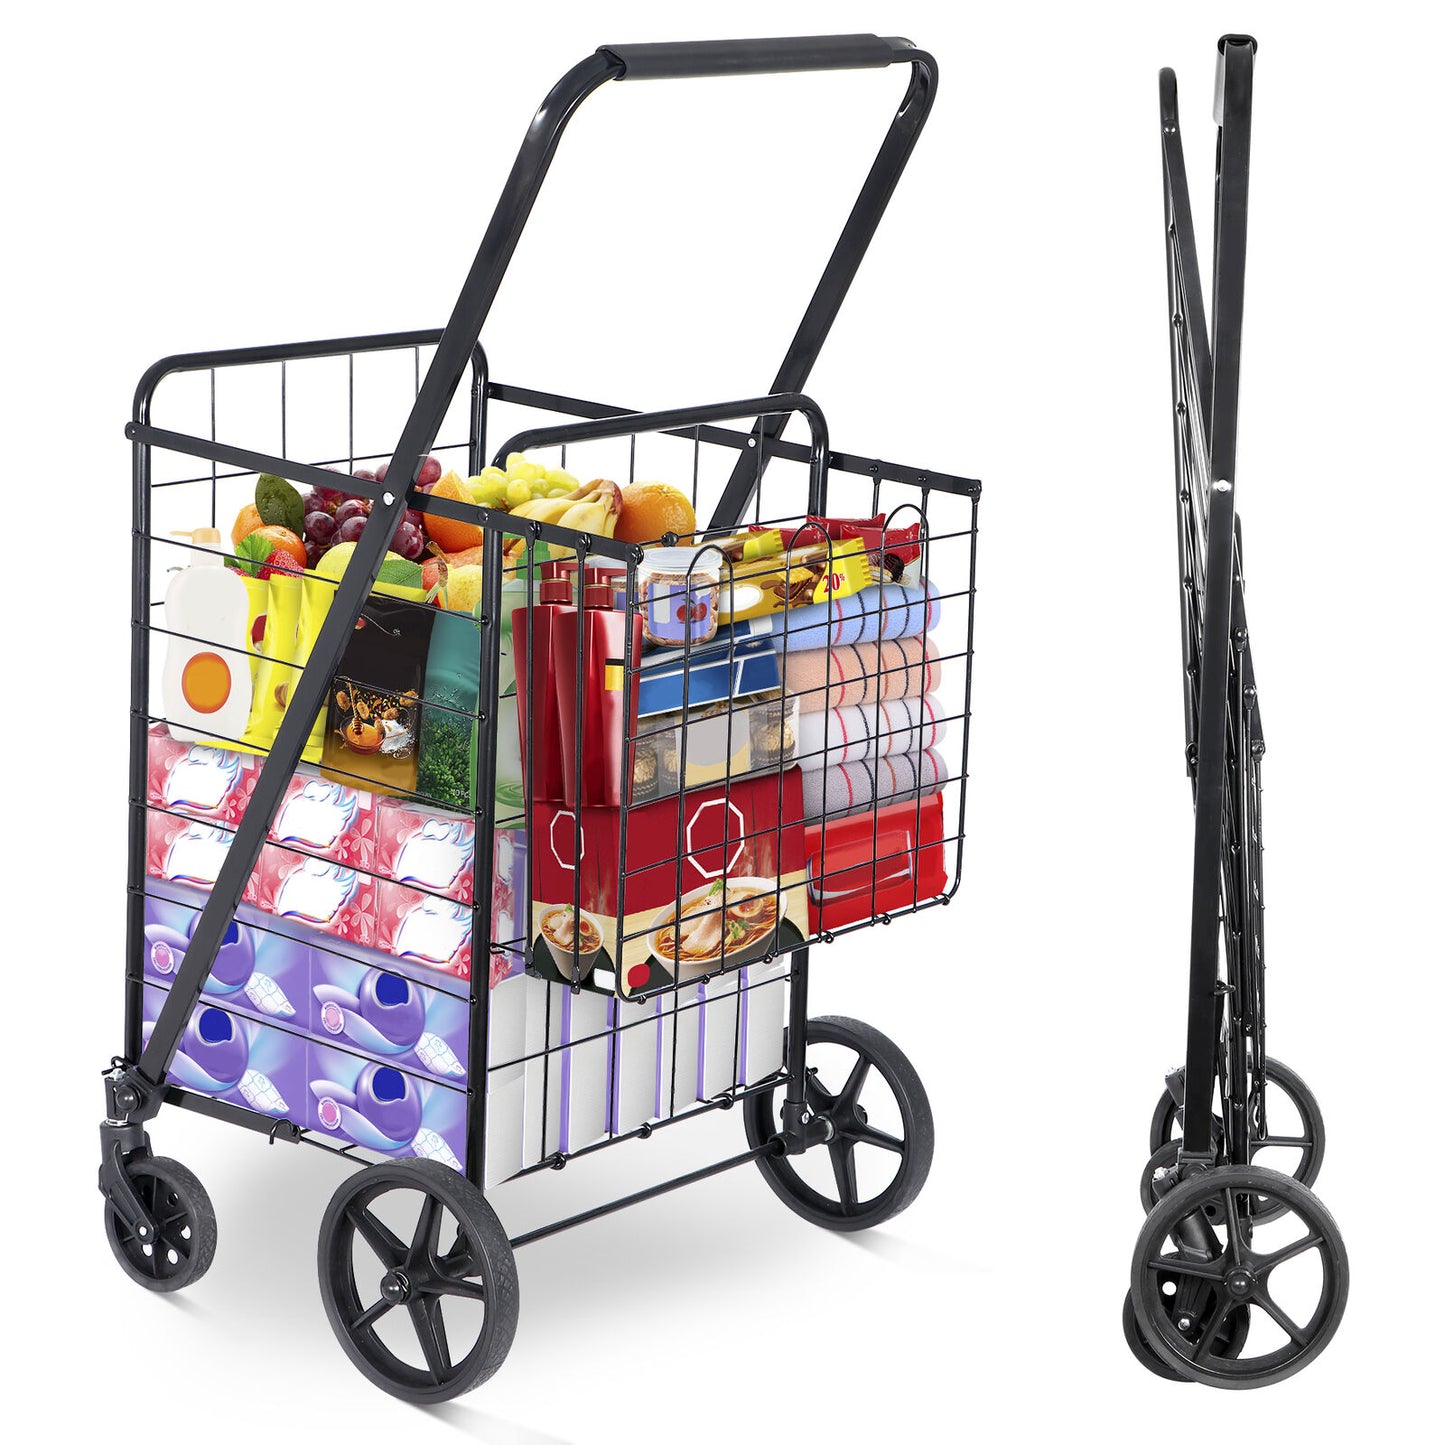 Folding Shopping Cart Utility Cart with Double Basket and Swivel Wheels